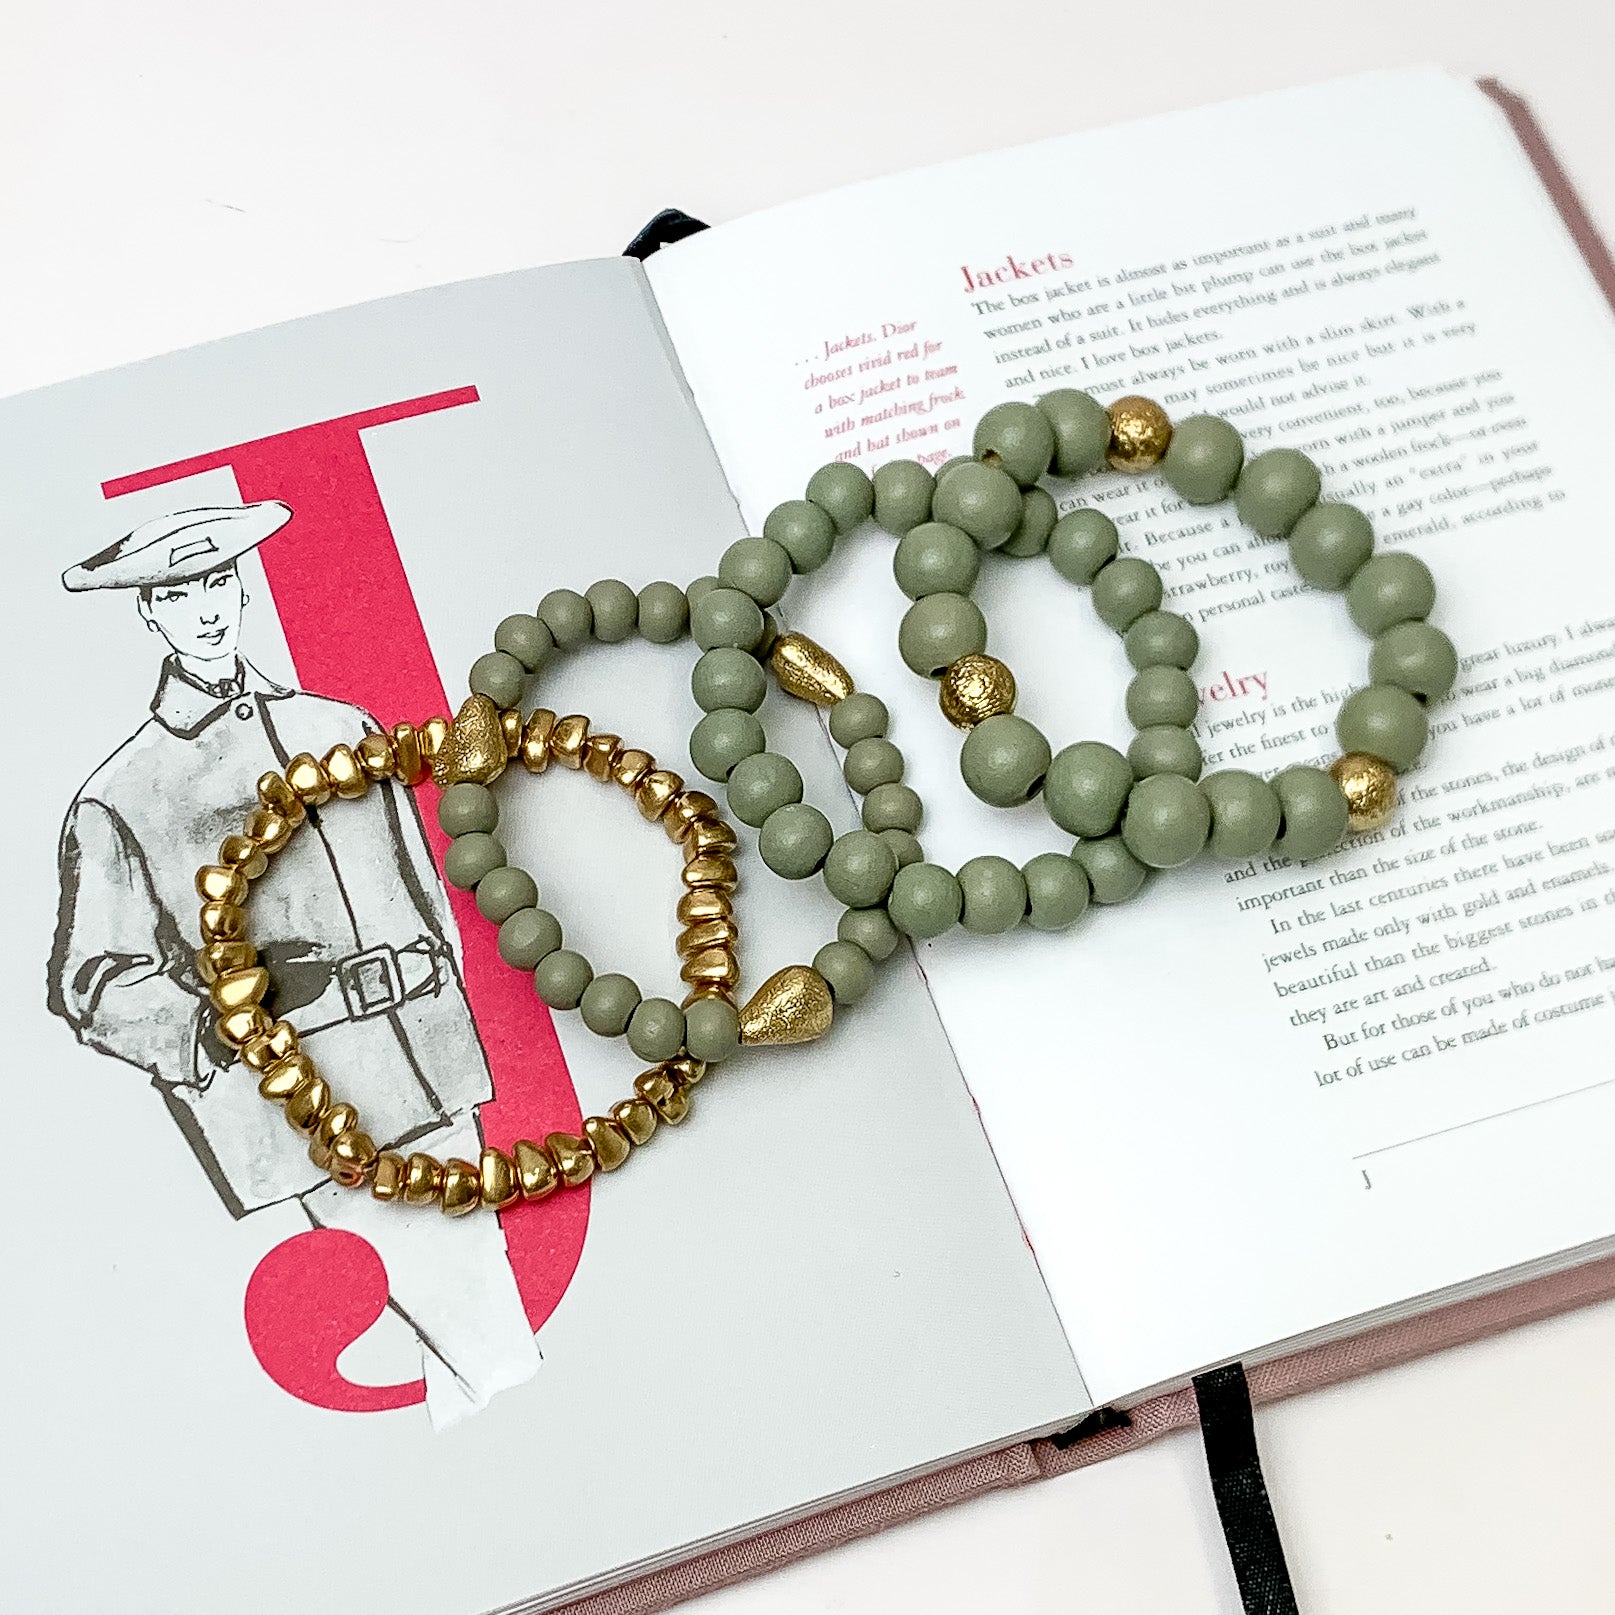 Set of Four | Stretchy Grey Beaded Bracelets featuring a Gold Tone Bracelet. Pictured on a white background. Bracelets are laying on top of an open book.